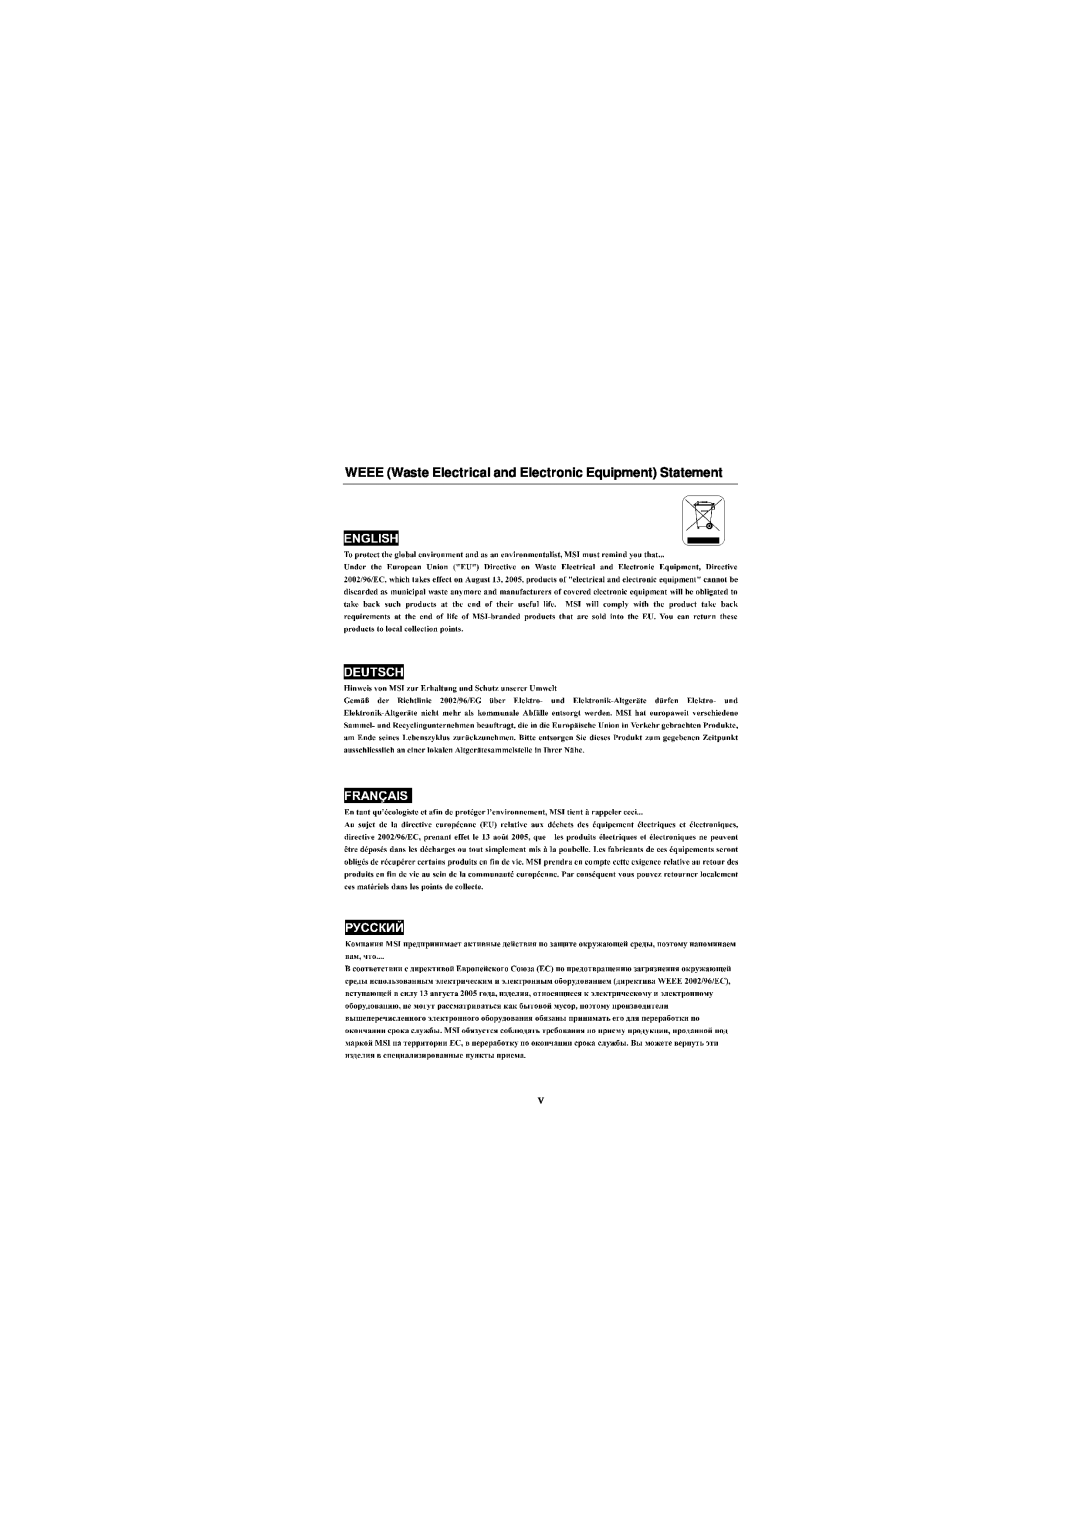 Intel IM-Q35 Series manual WEEE Waste Electrical and Electronic Equipment Statement 